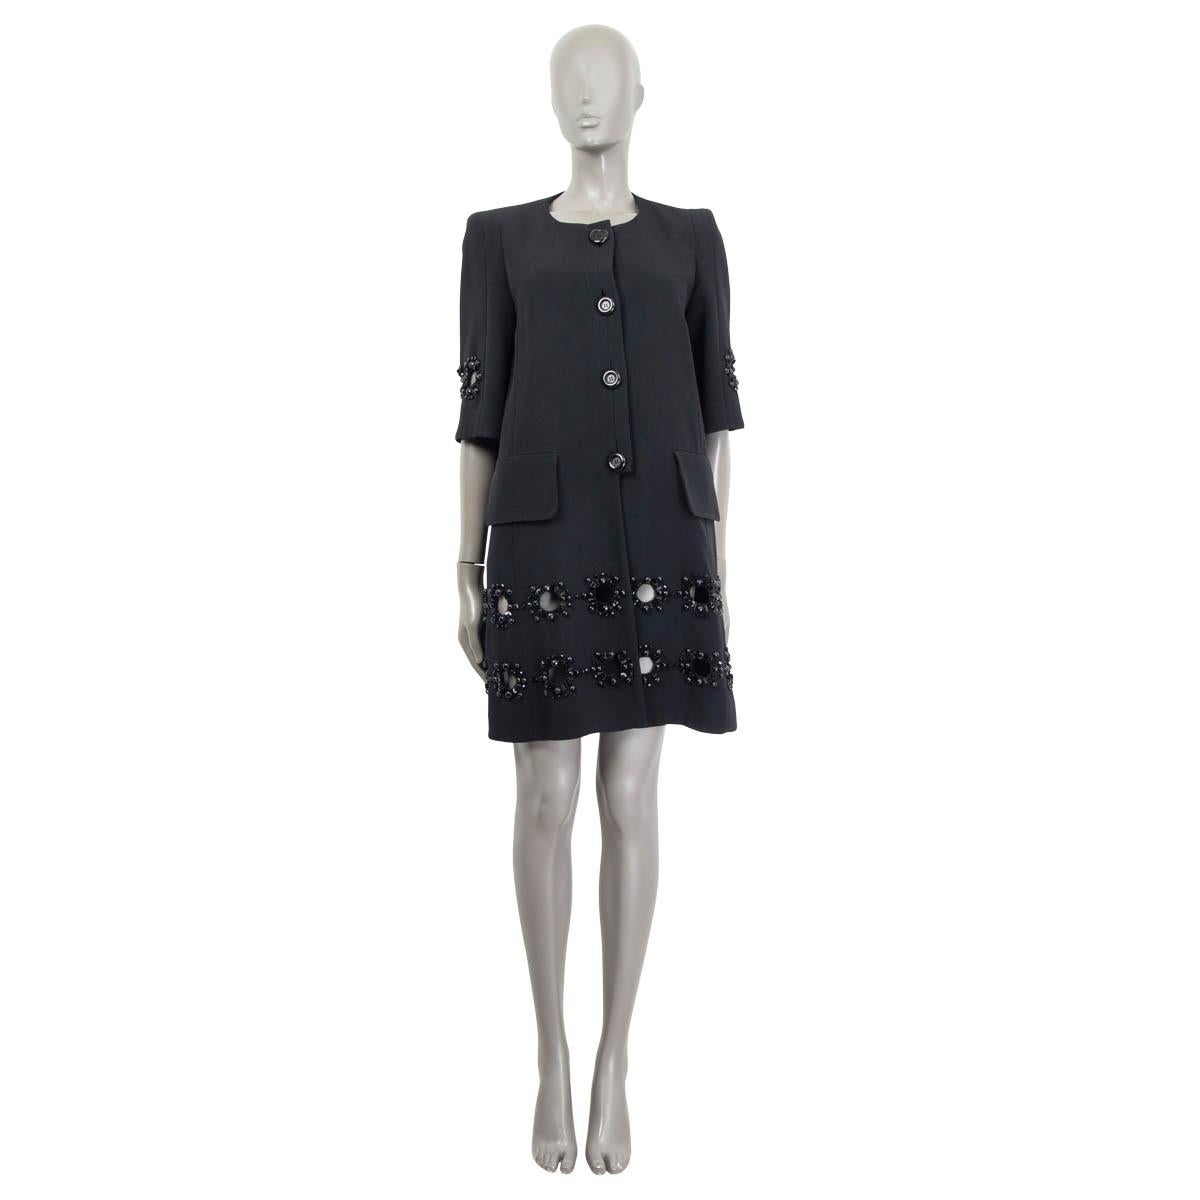 100% authentic Louis Vuitton collarless 3/4-sleeve long jacket in black acetate (58%) and viscose (42%). With two front flap pockets and circle cutouts framed by black beads. Closes with large black buttons on the front. Lined in black cupro (50%)